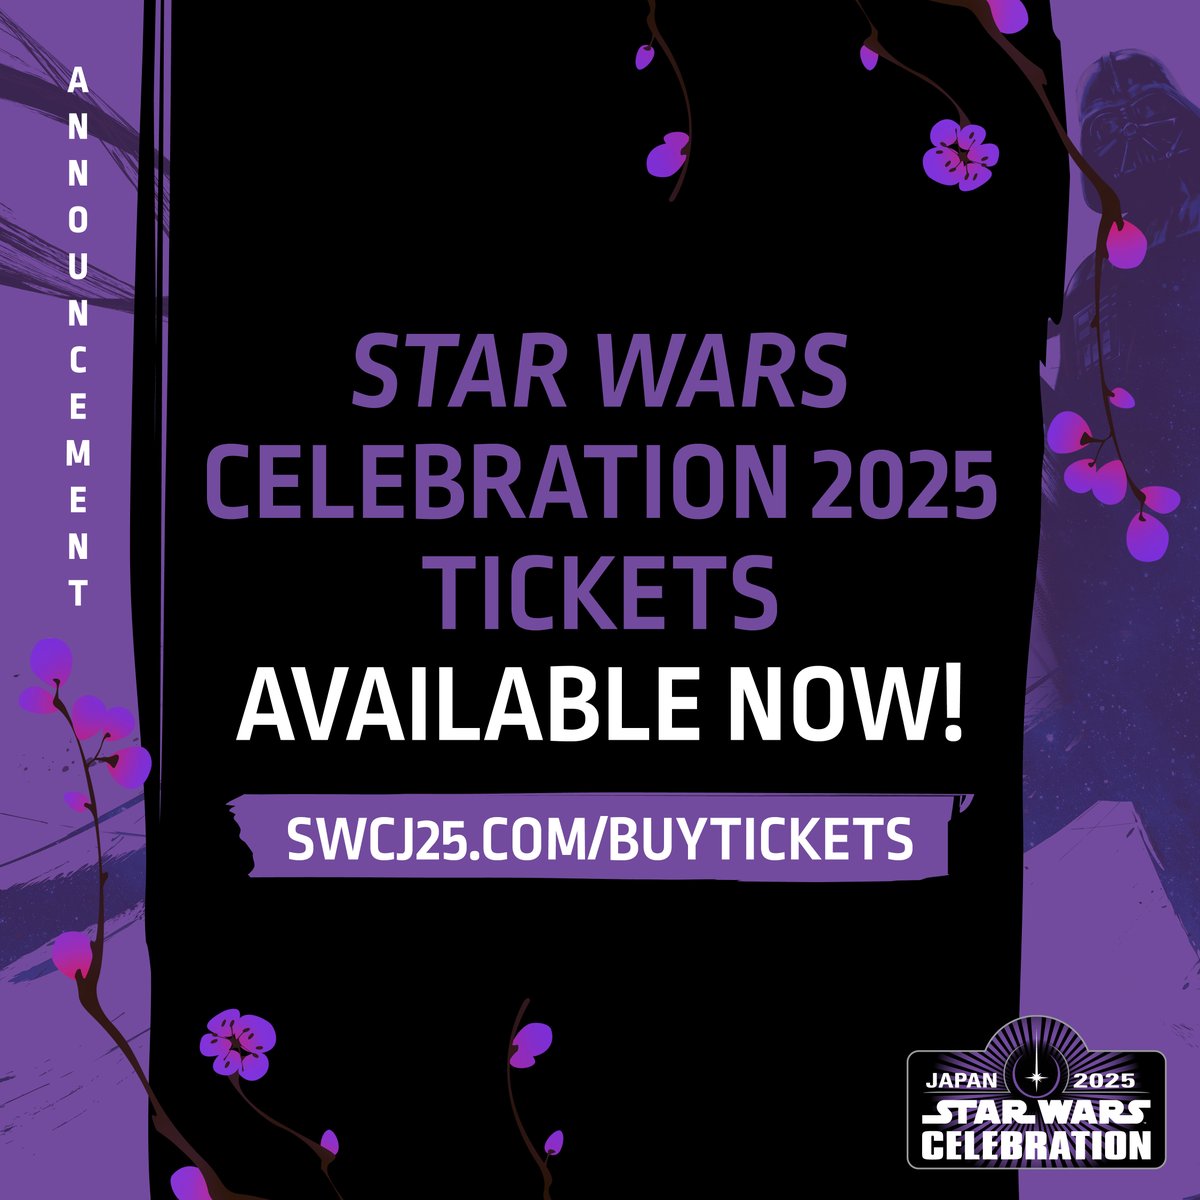 Fire up the hyperdrive and check your star maps! Tickets for #StarWarsCelebration Japan 2025 are available now. strw.rs/6015jPpIR